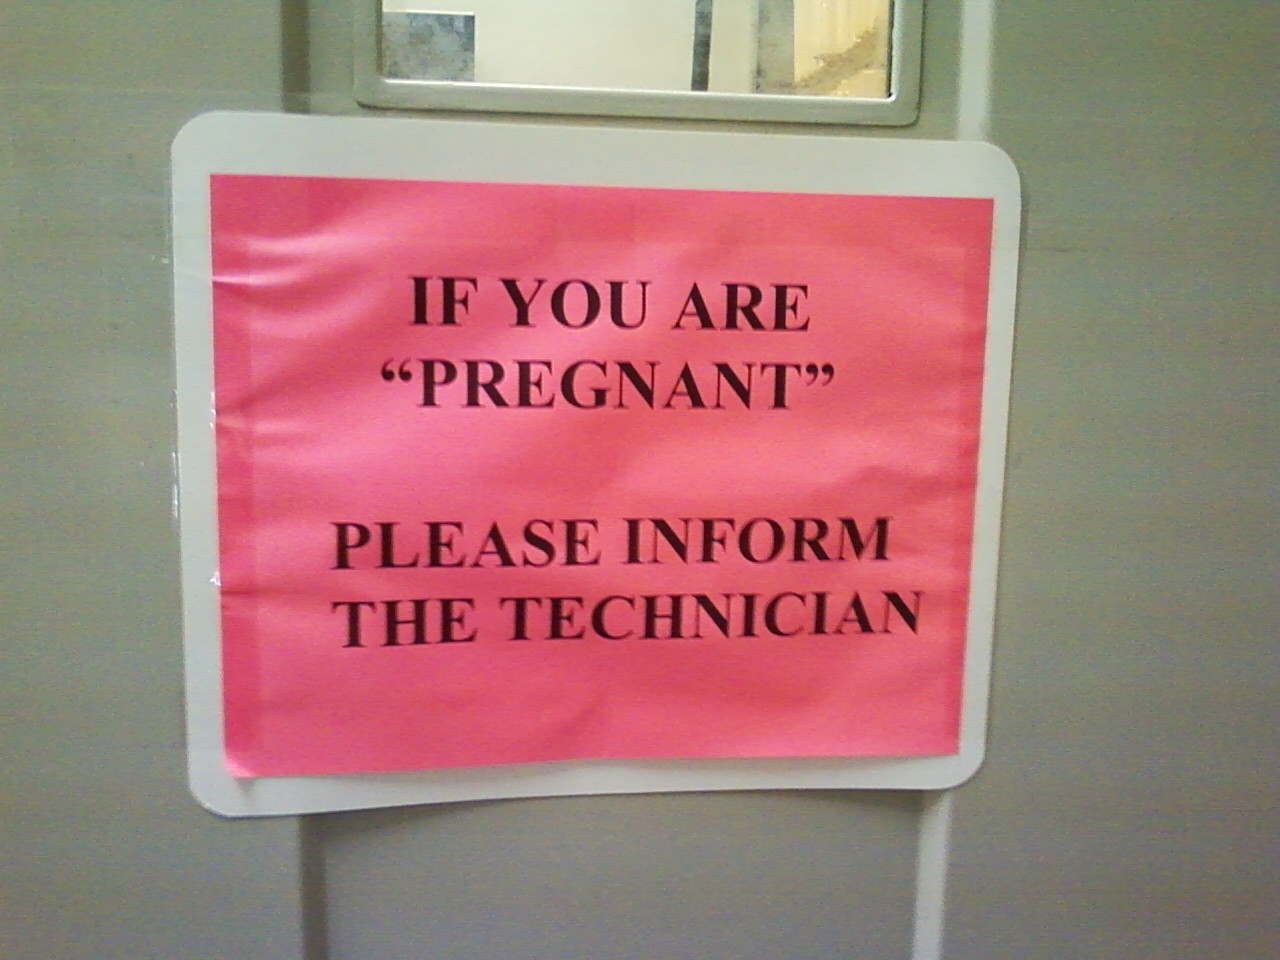 suspicious quotation marks - If You Are "Pregnant Please Inform The Technician